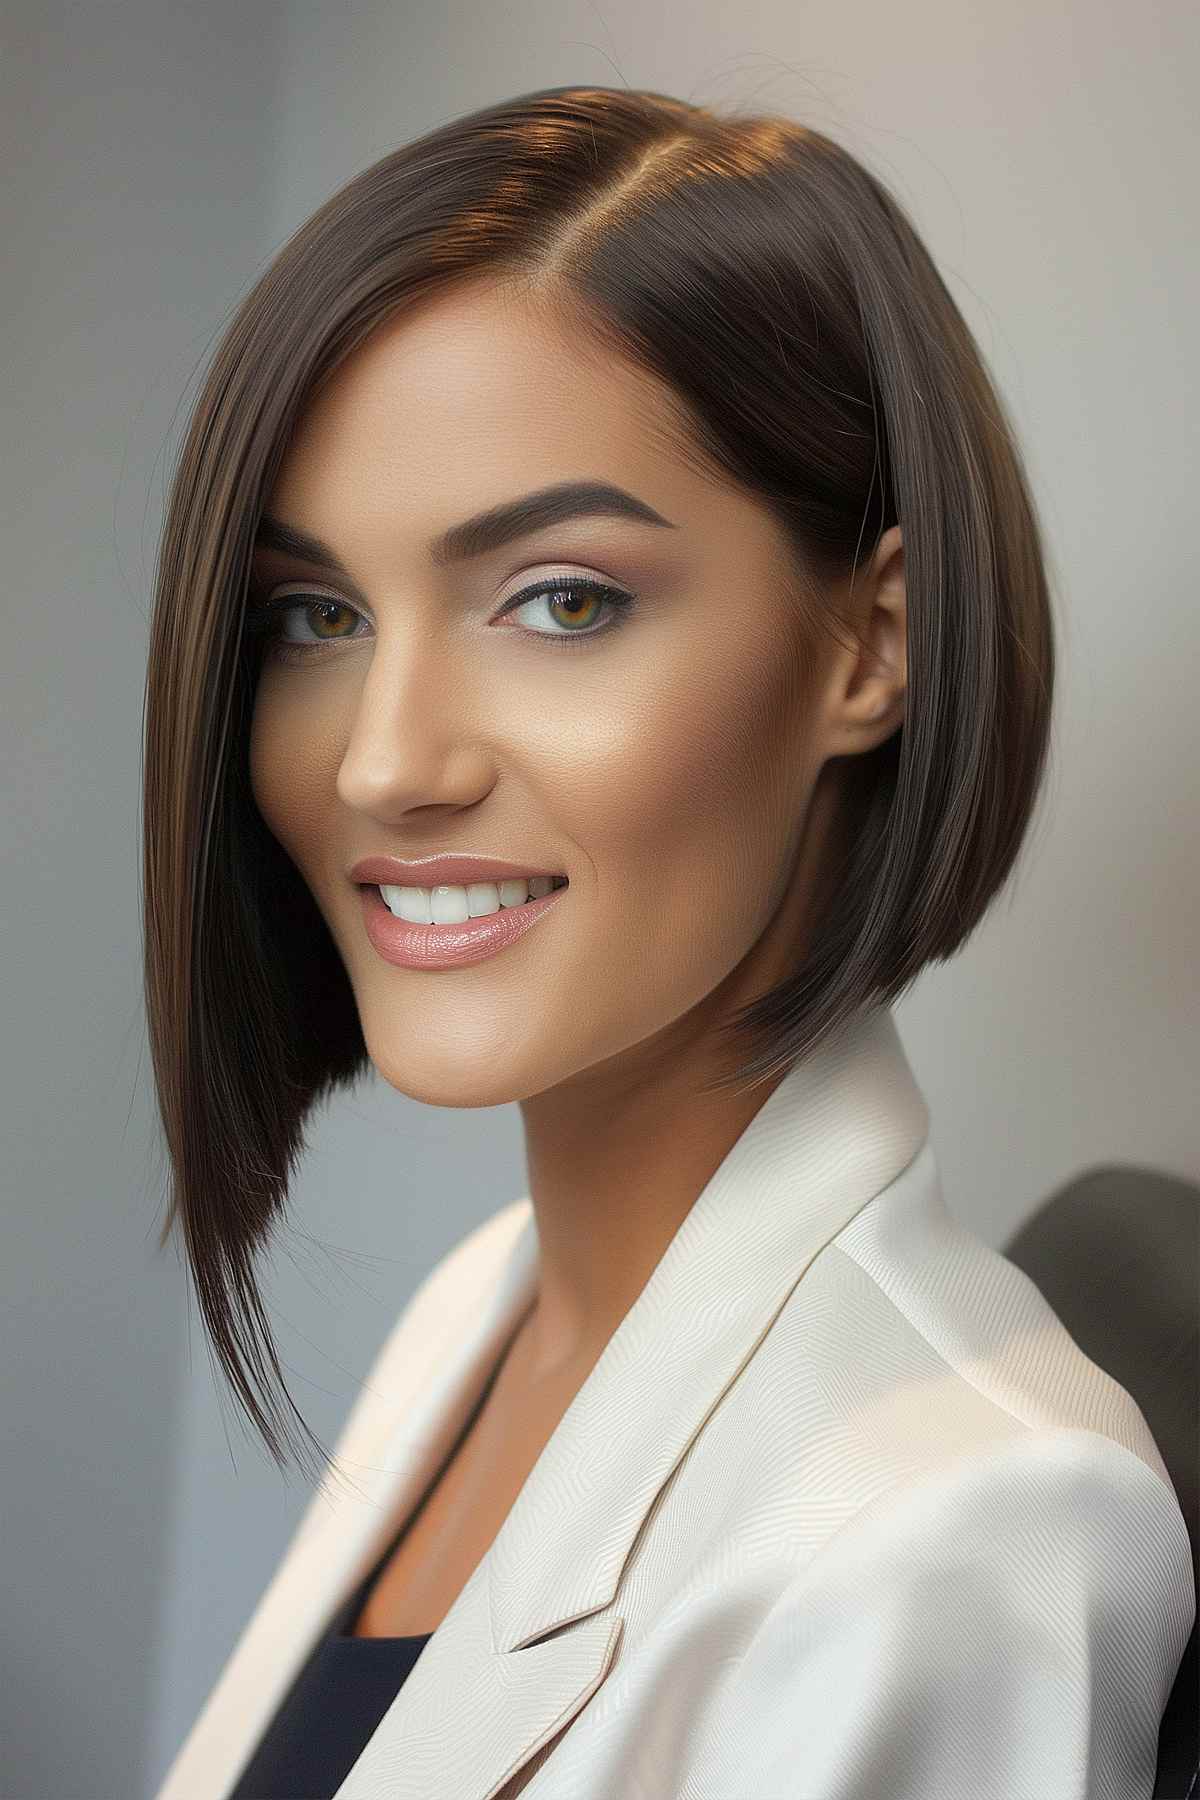 Asymmetrical bob with one side longer, in a rich dark color, perfect for thick, straight hair.